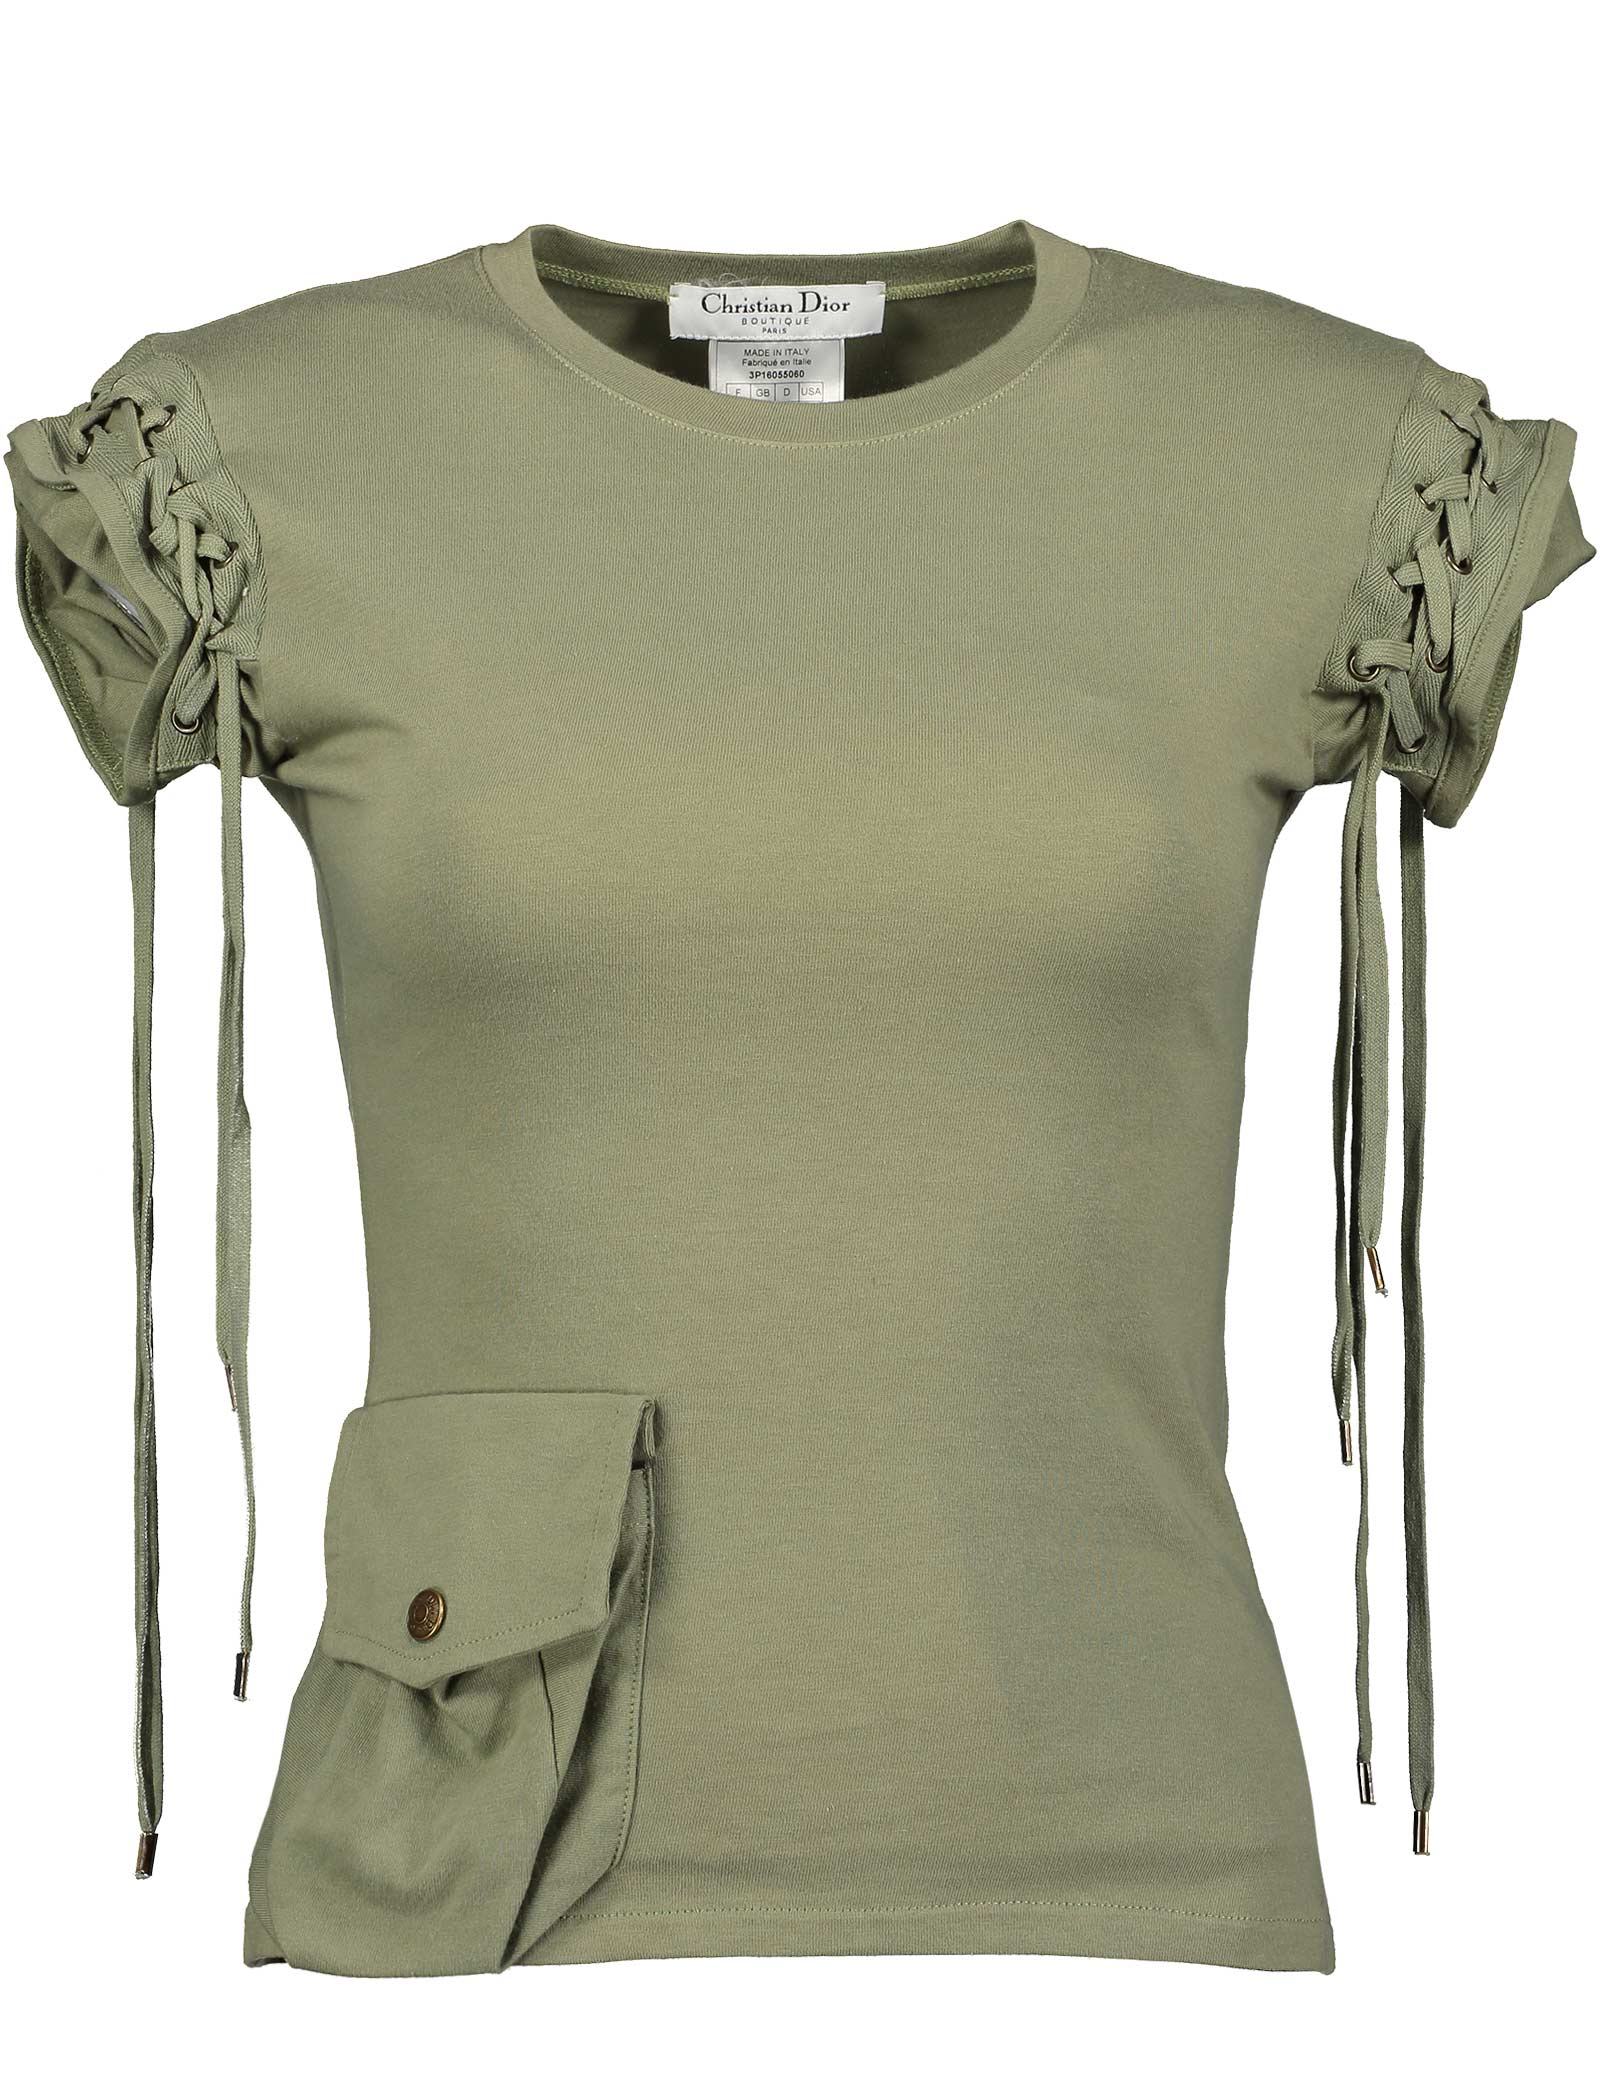 Christian Dior Spring 2003 Olive Lace Tank Top